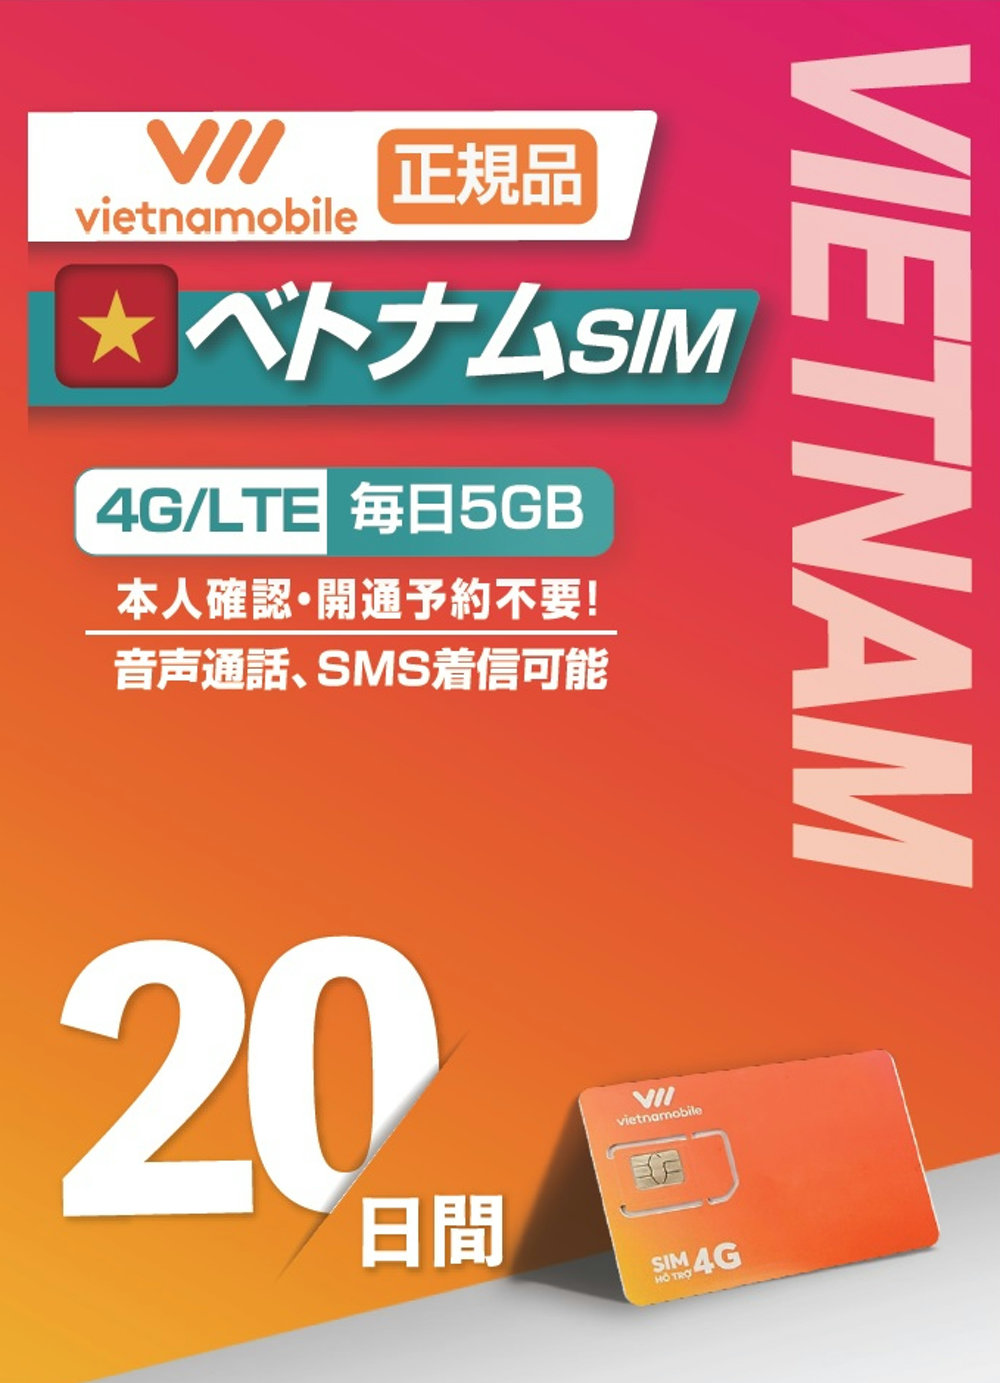 Vietnamobile Vietnam plipeidoSIM use period 20 day every day 5GB use possibility 4G*3G connection data communication SIM( Vietnam actual place. telephone number .. telephone call *SMS. arrival only possibility )